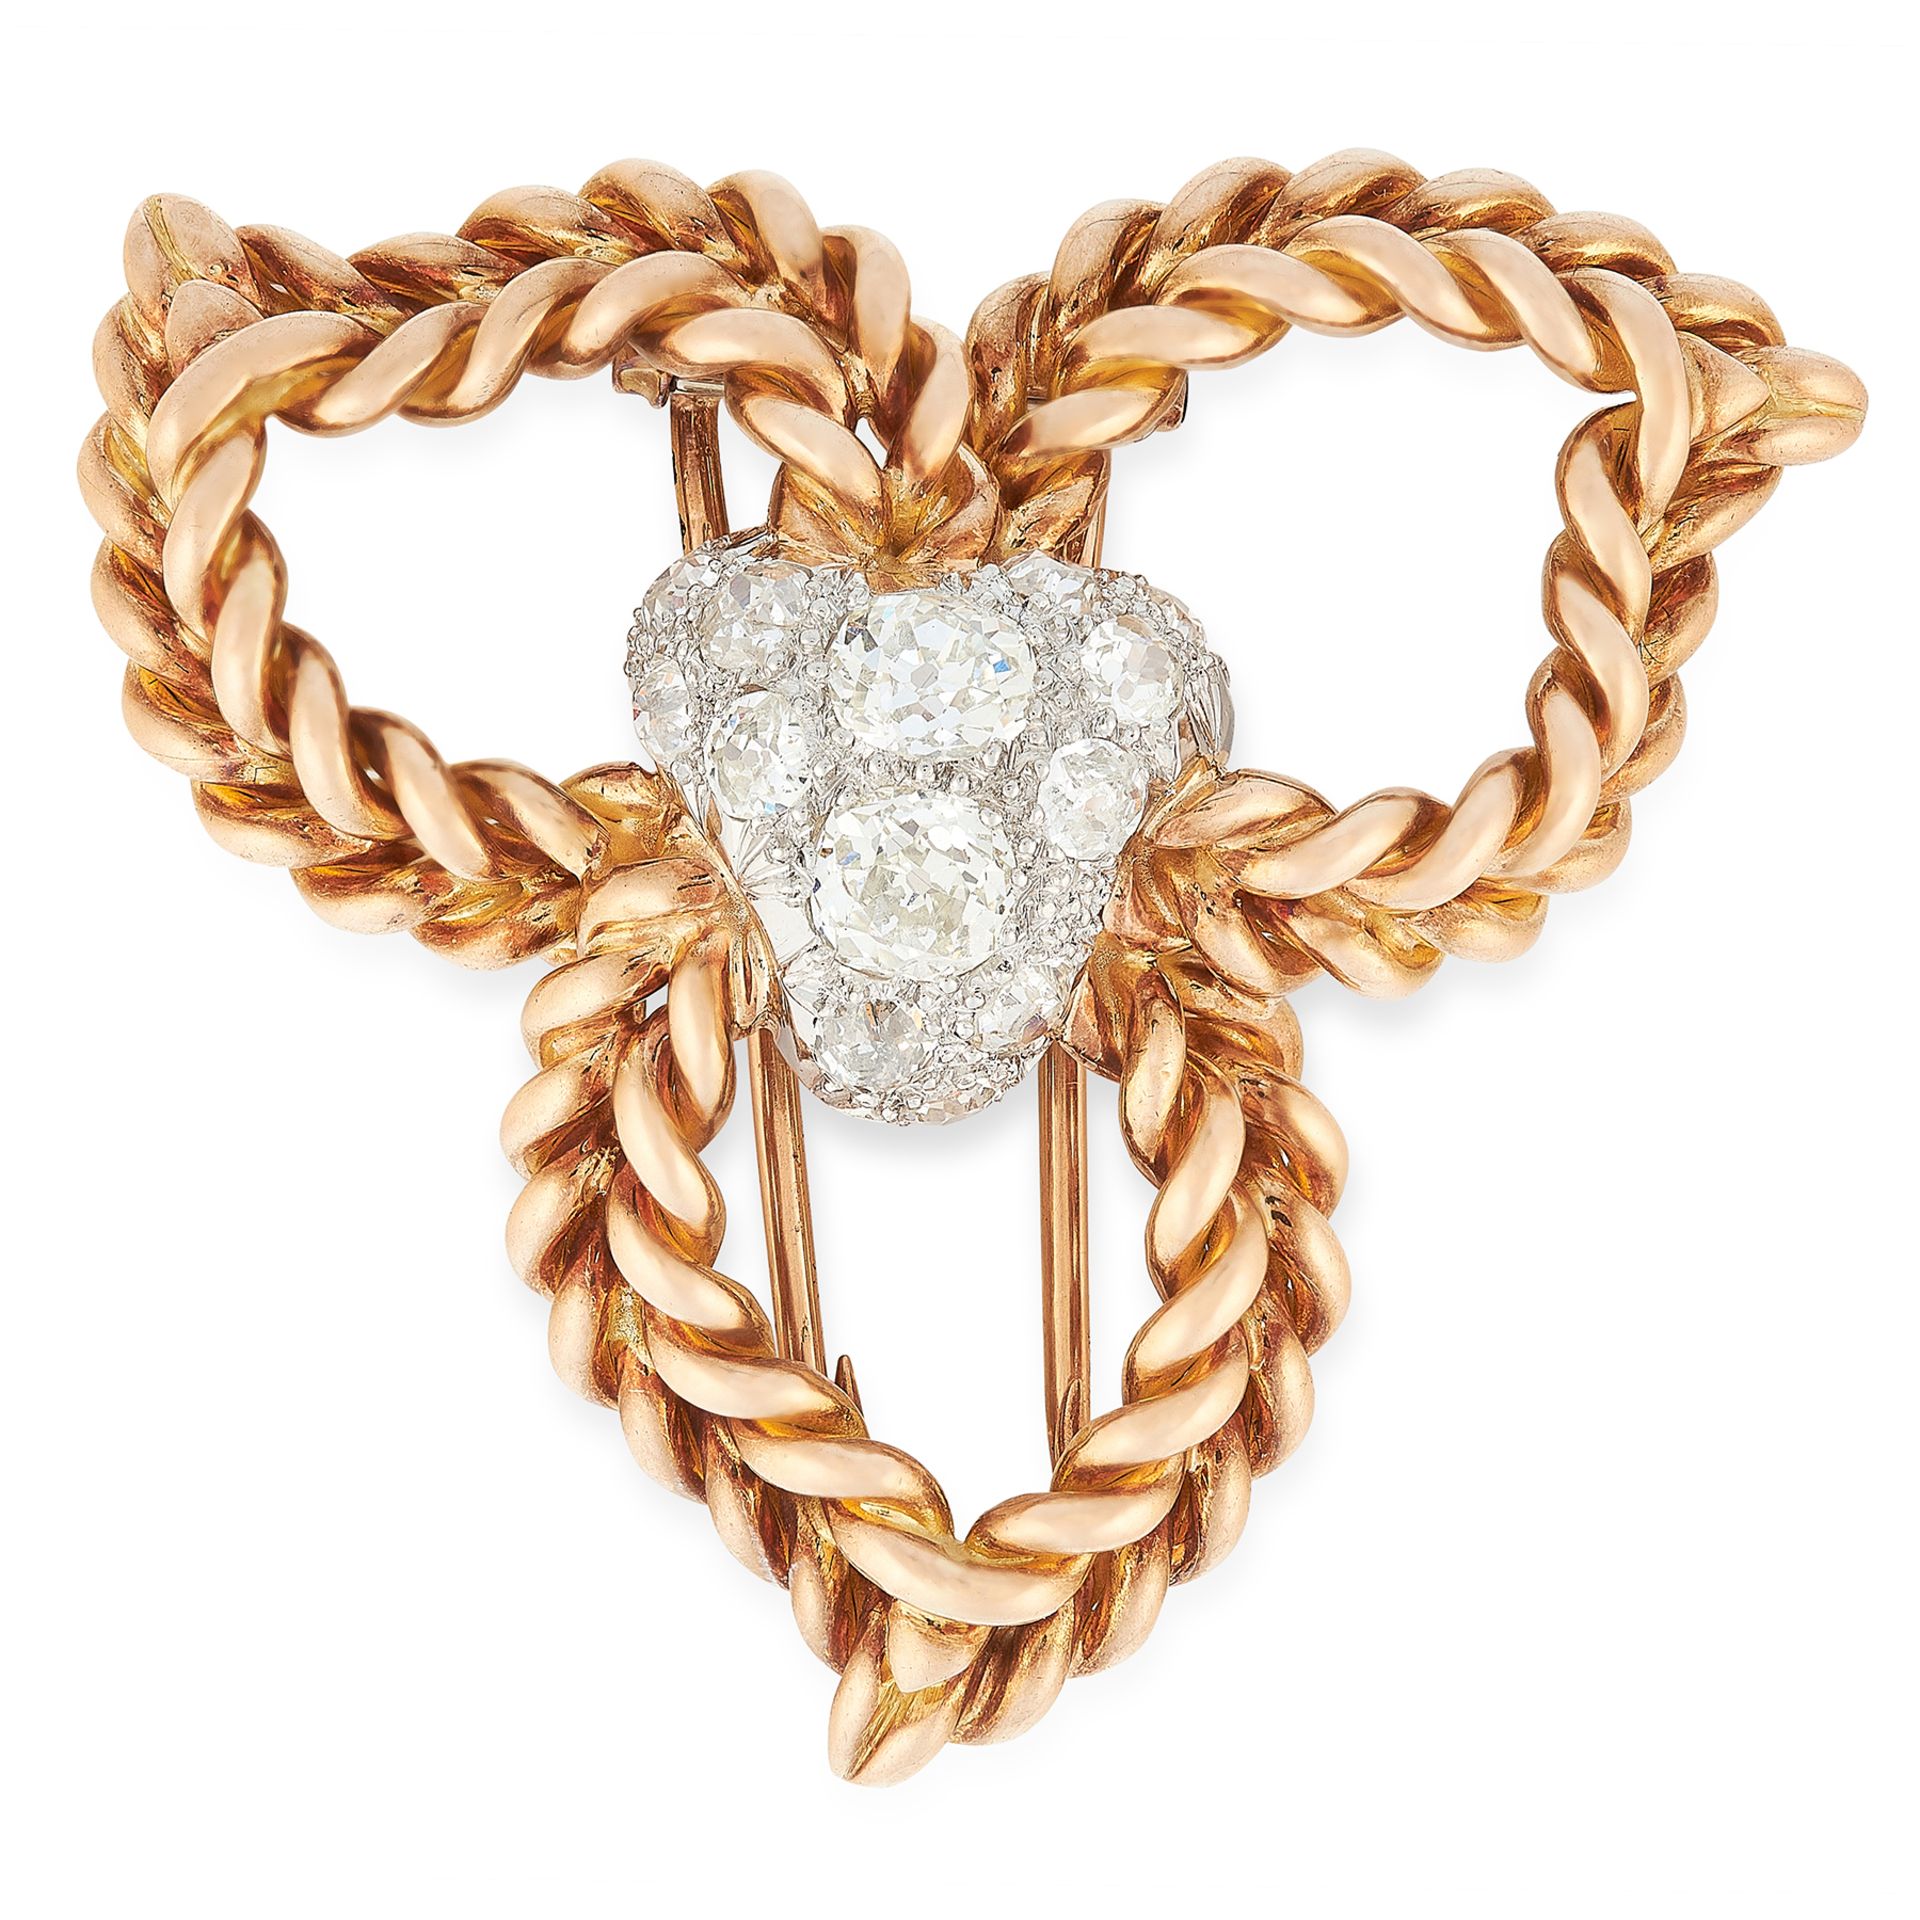 A VINTAGE DIAMOND BROOCH, STERLE in 18ct yellow gold, formed of a trio of twisted rope motifs,